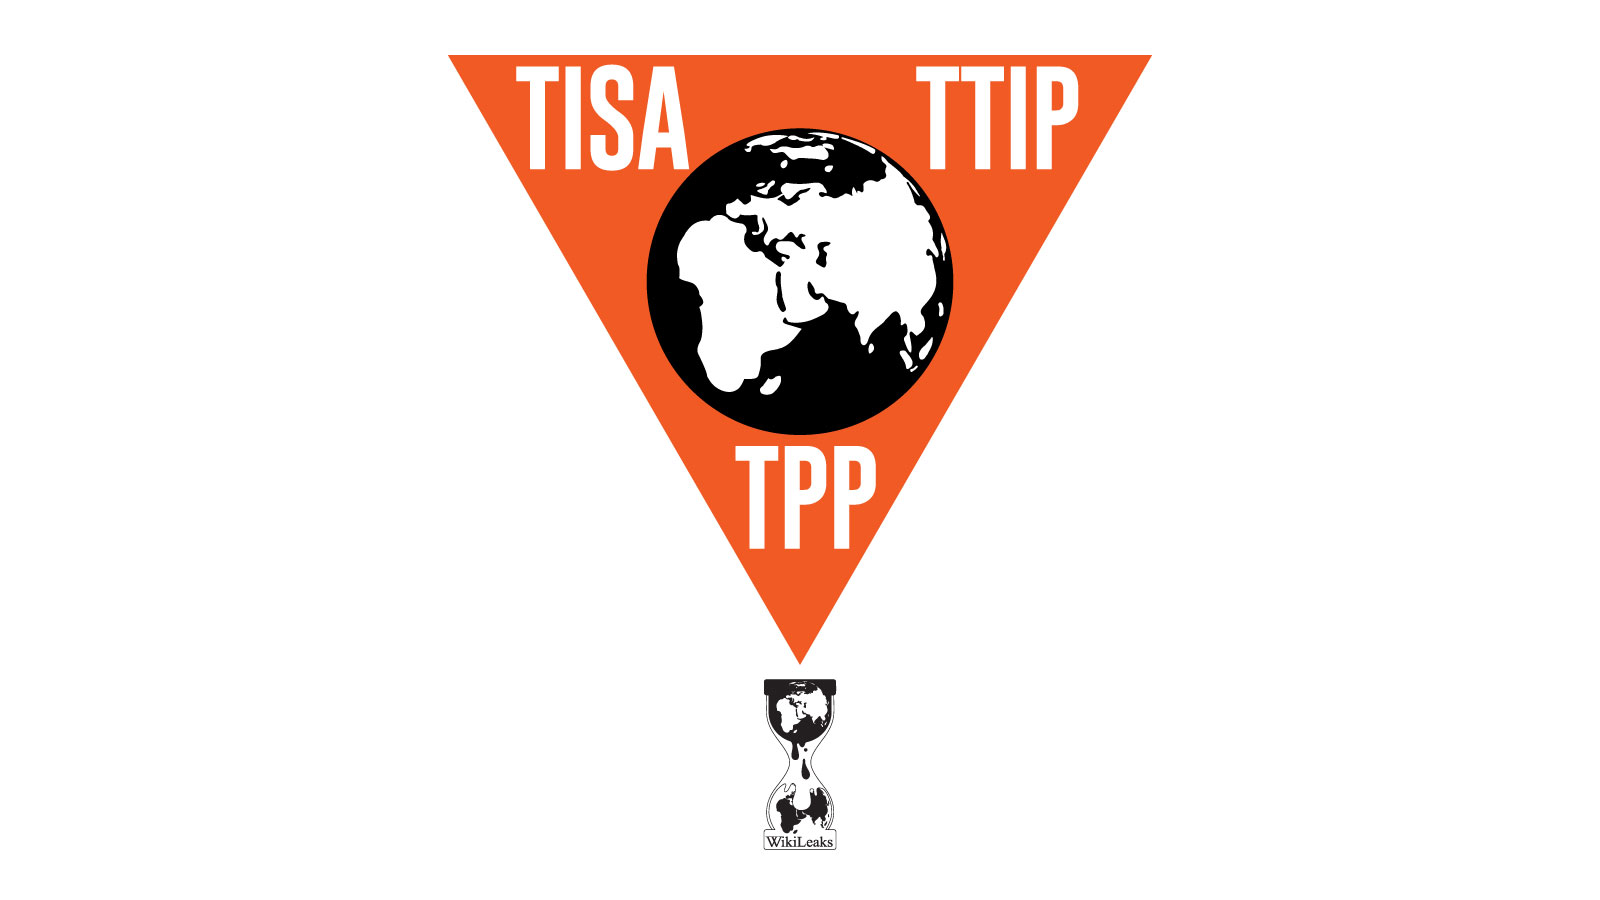 http://cont.ws/uploads/pic/2015/6/WikiLeaks-Global-Trade-Agreement-Triangulation.jpg